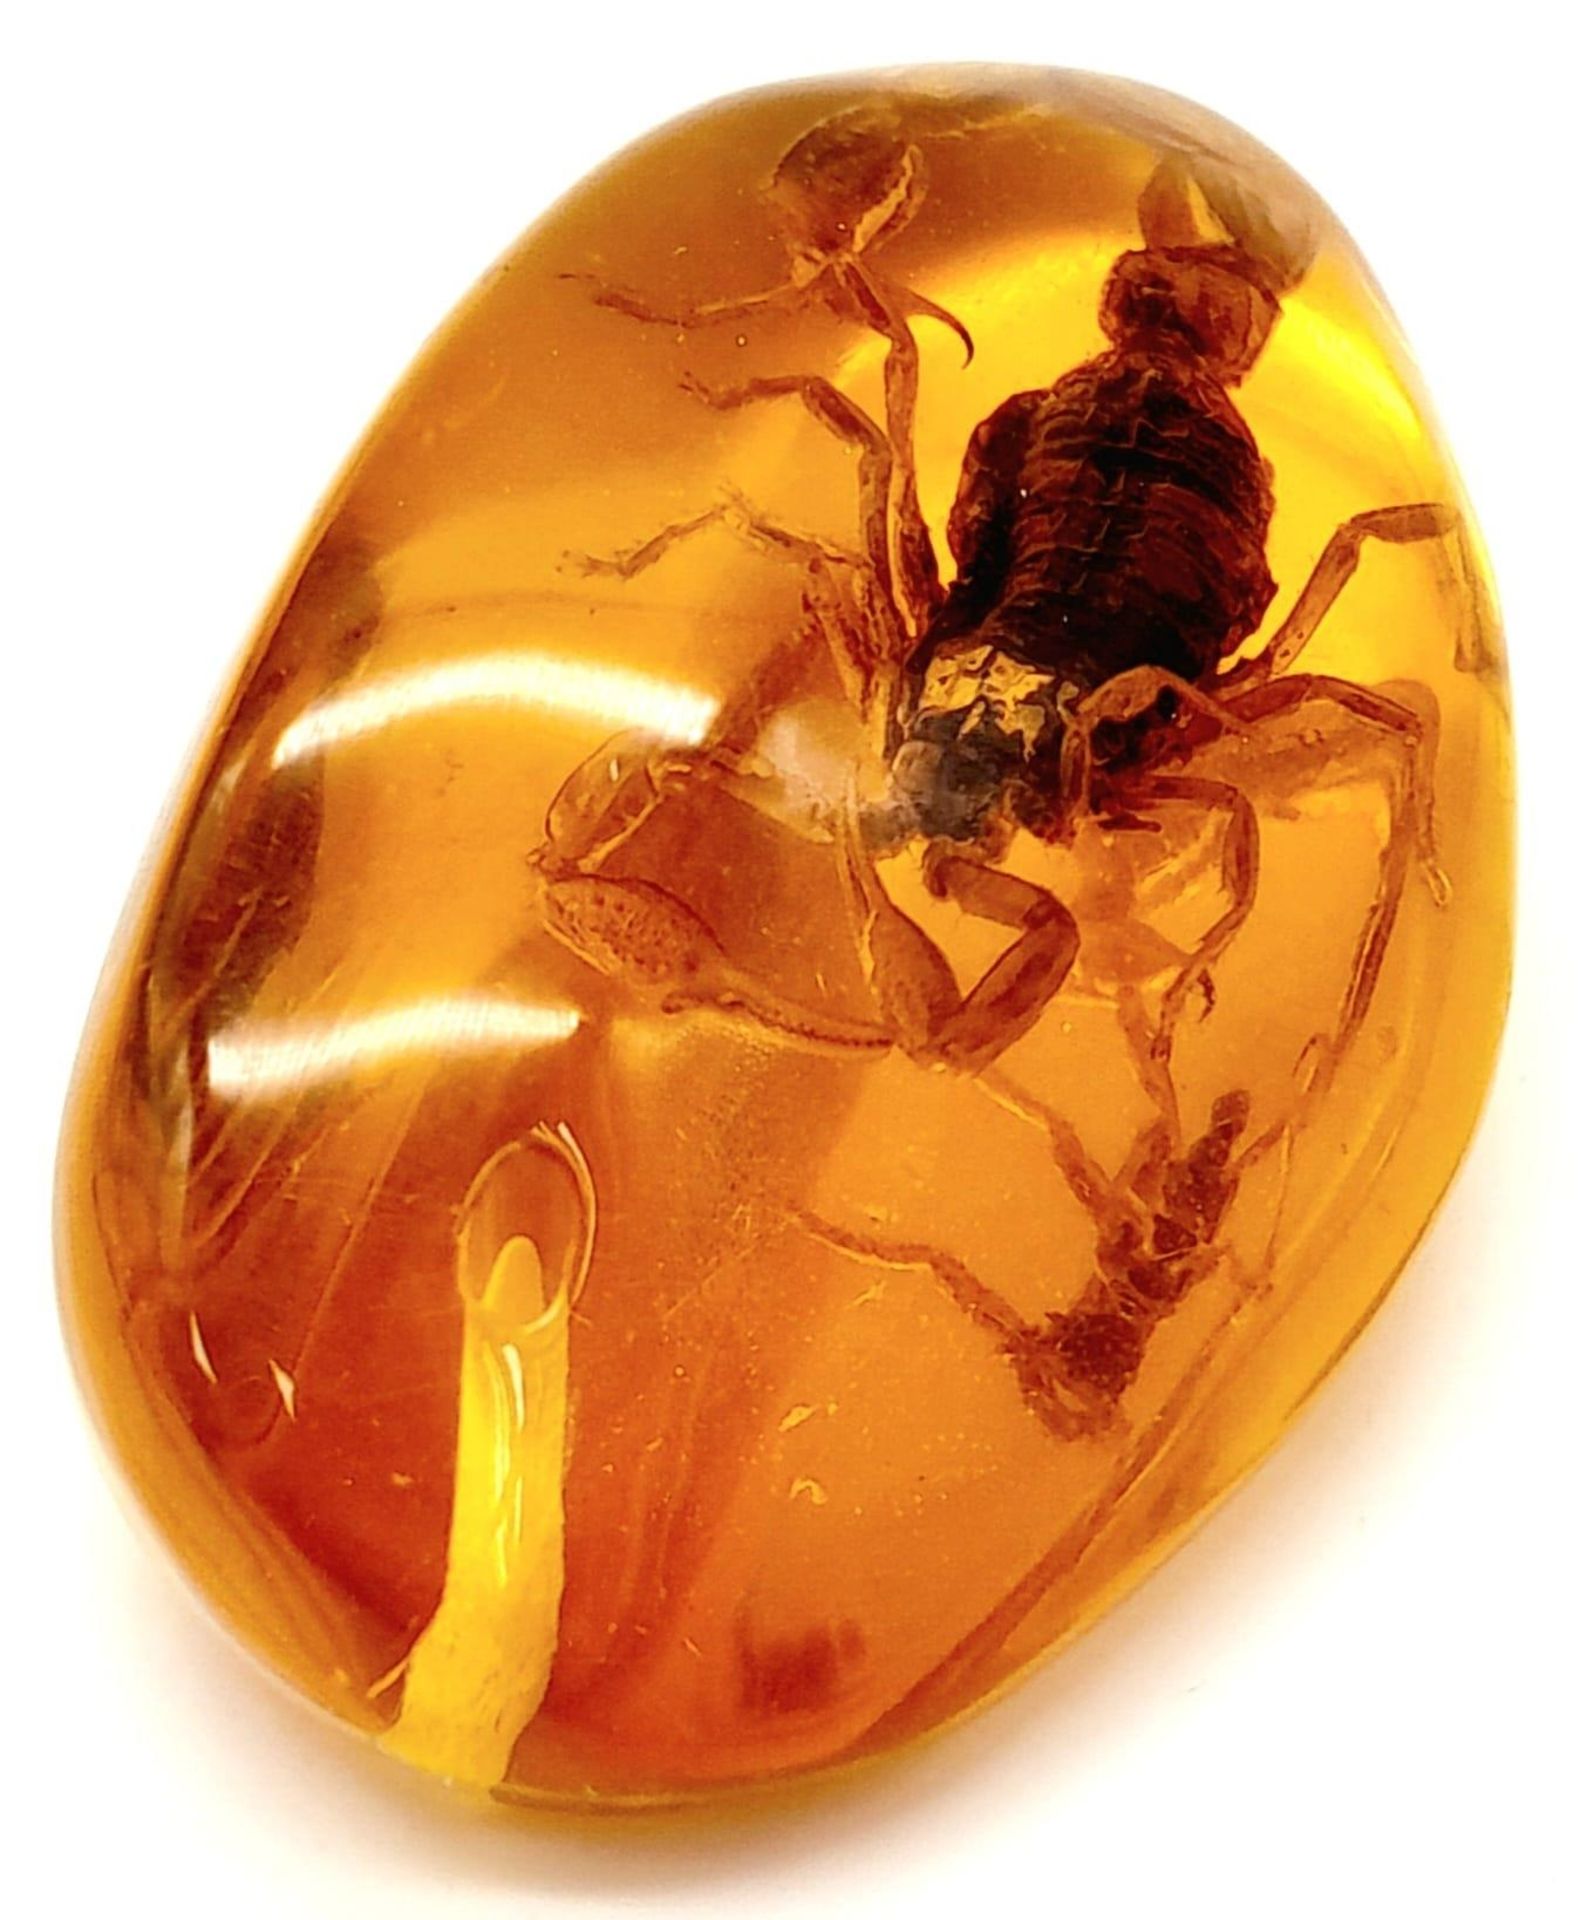 A Tail of the Unexpected! The Scorpion now Resides in an Amber Resin Prison for all of Eternity.